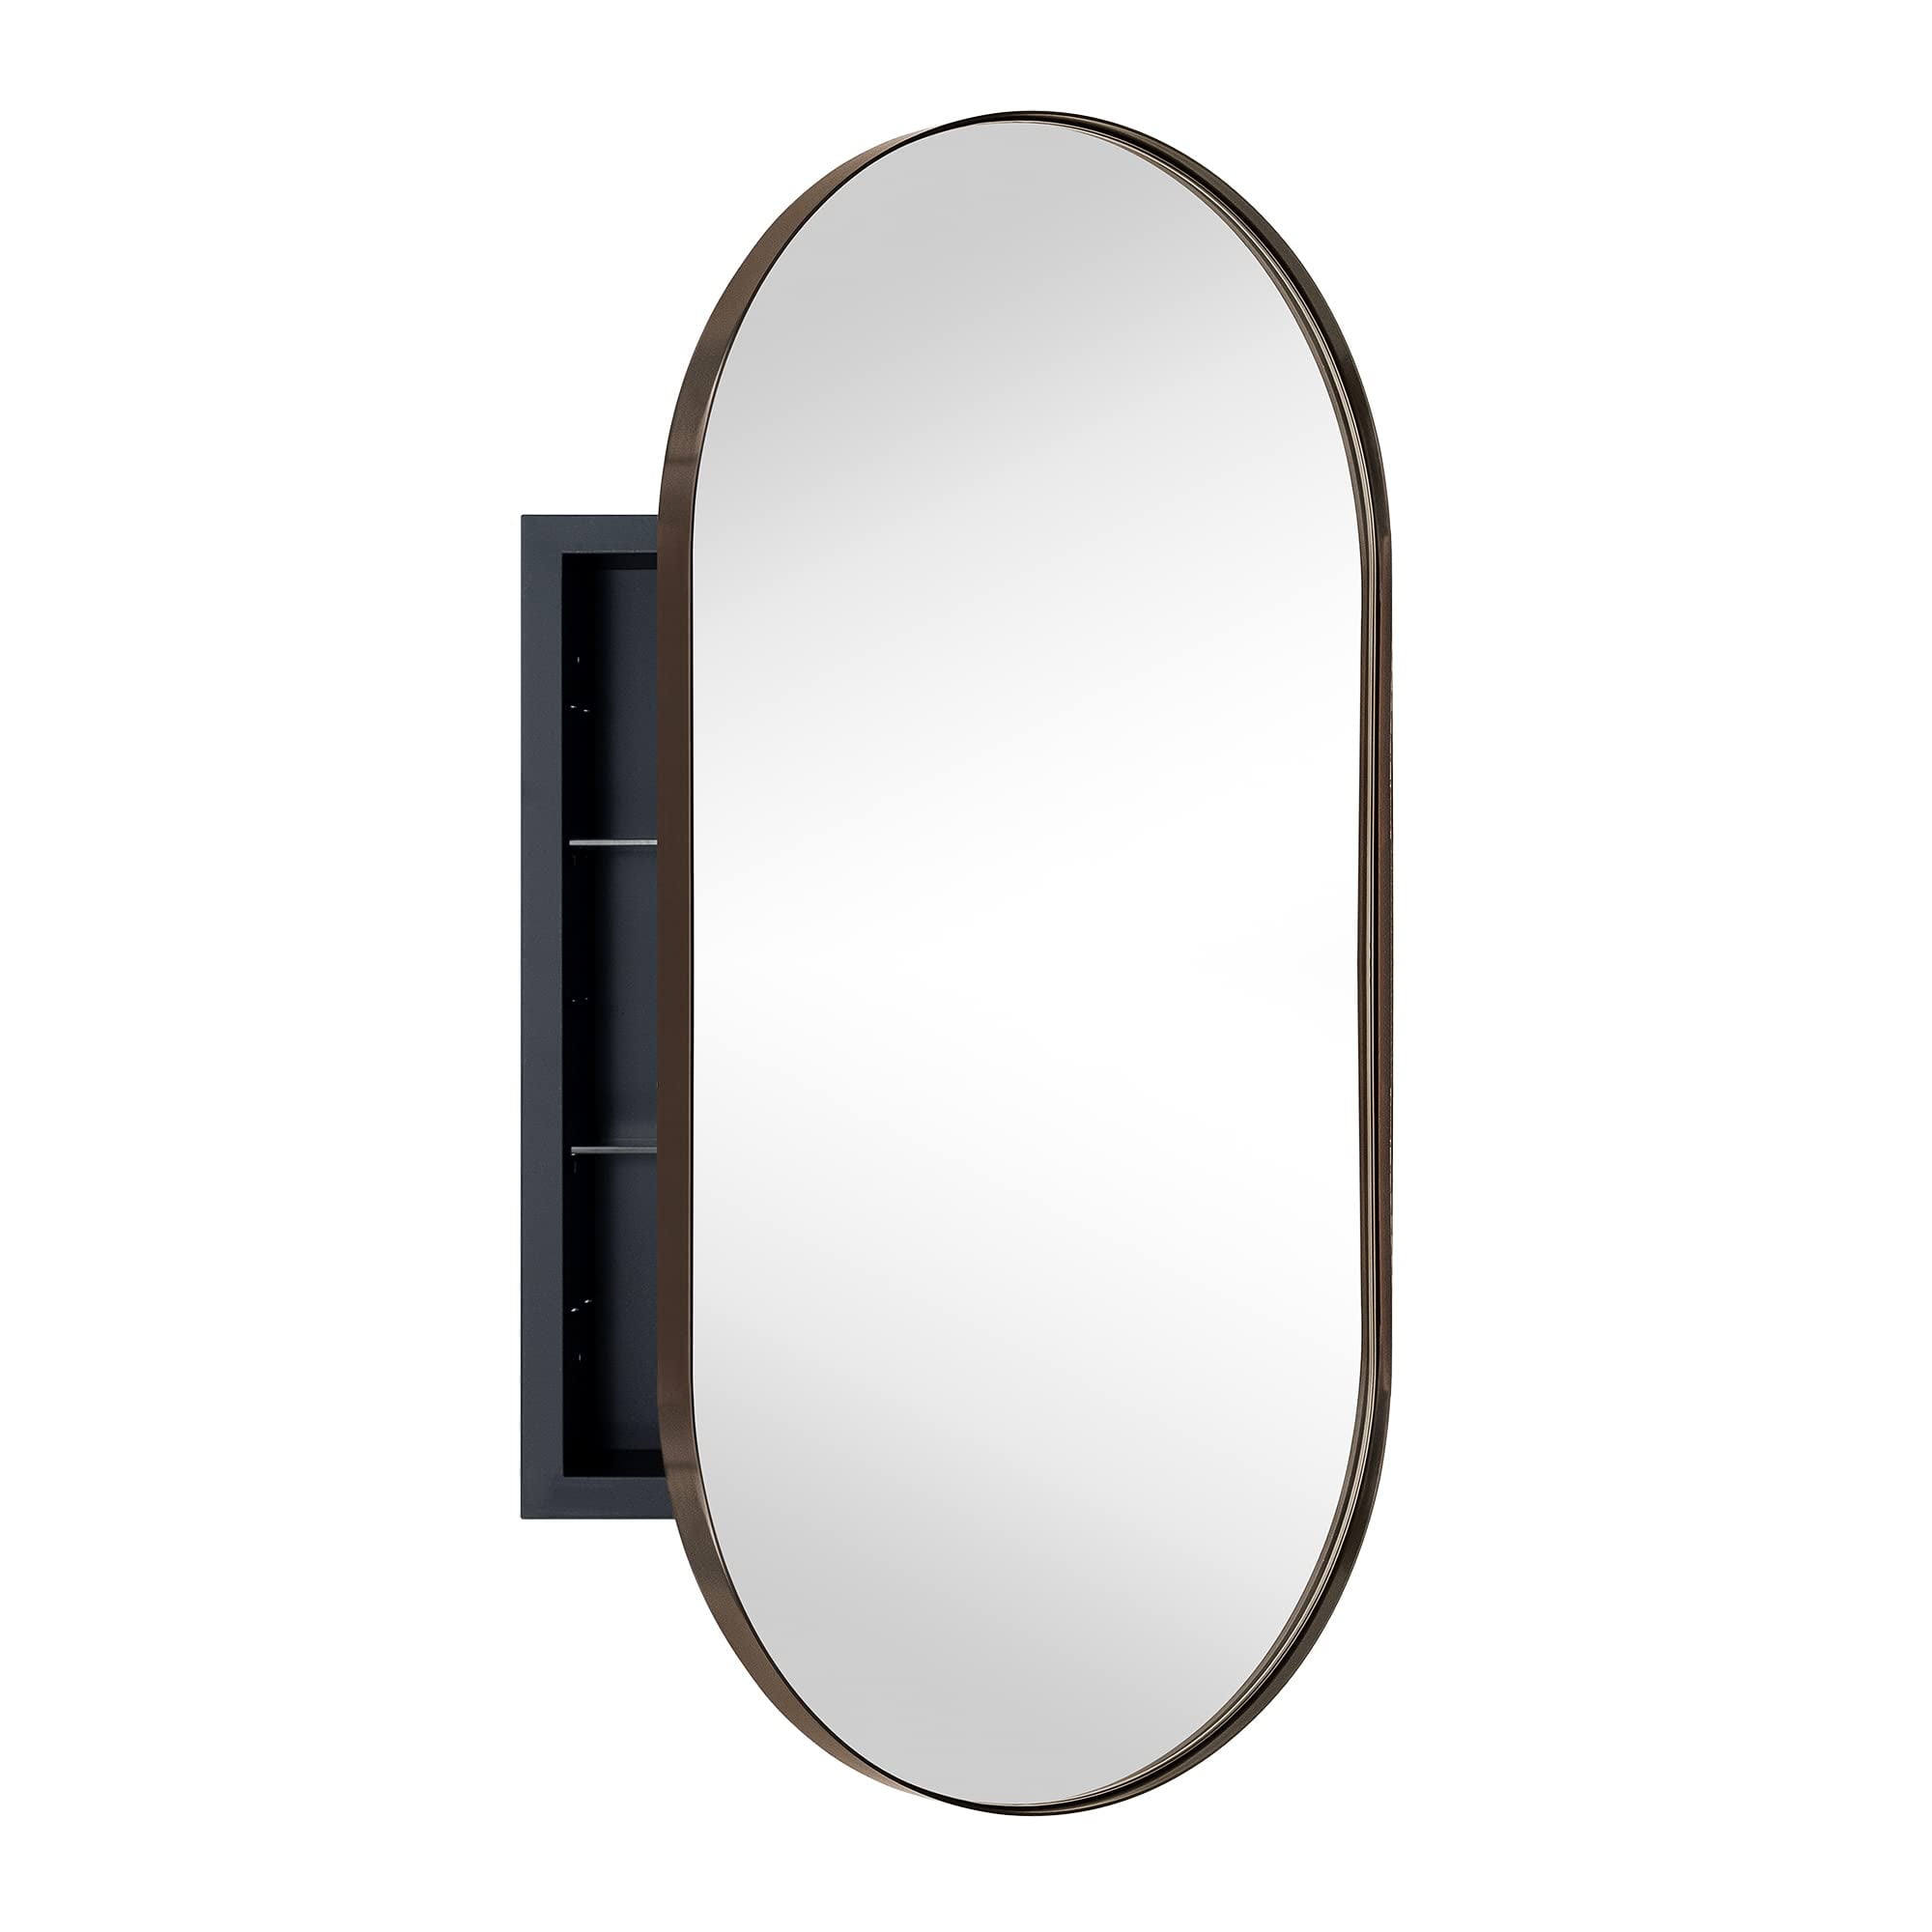 Eghome Black Oval Recessed Bathroom Medicine Cabinet With Mirror Stainless Steel Metal Framed Oblong Pill Shaped 16x33 Com